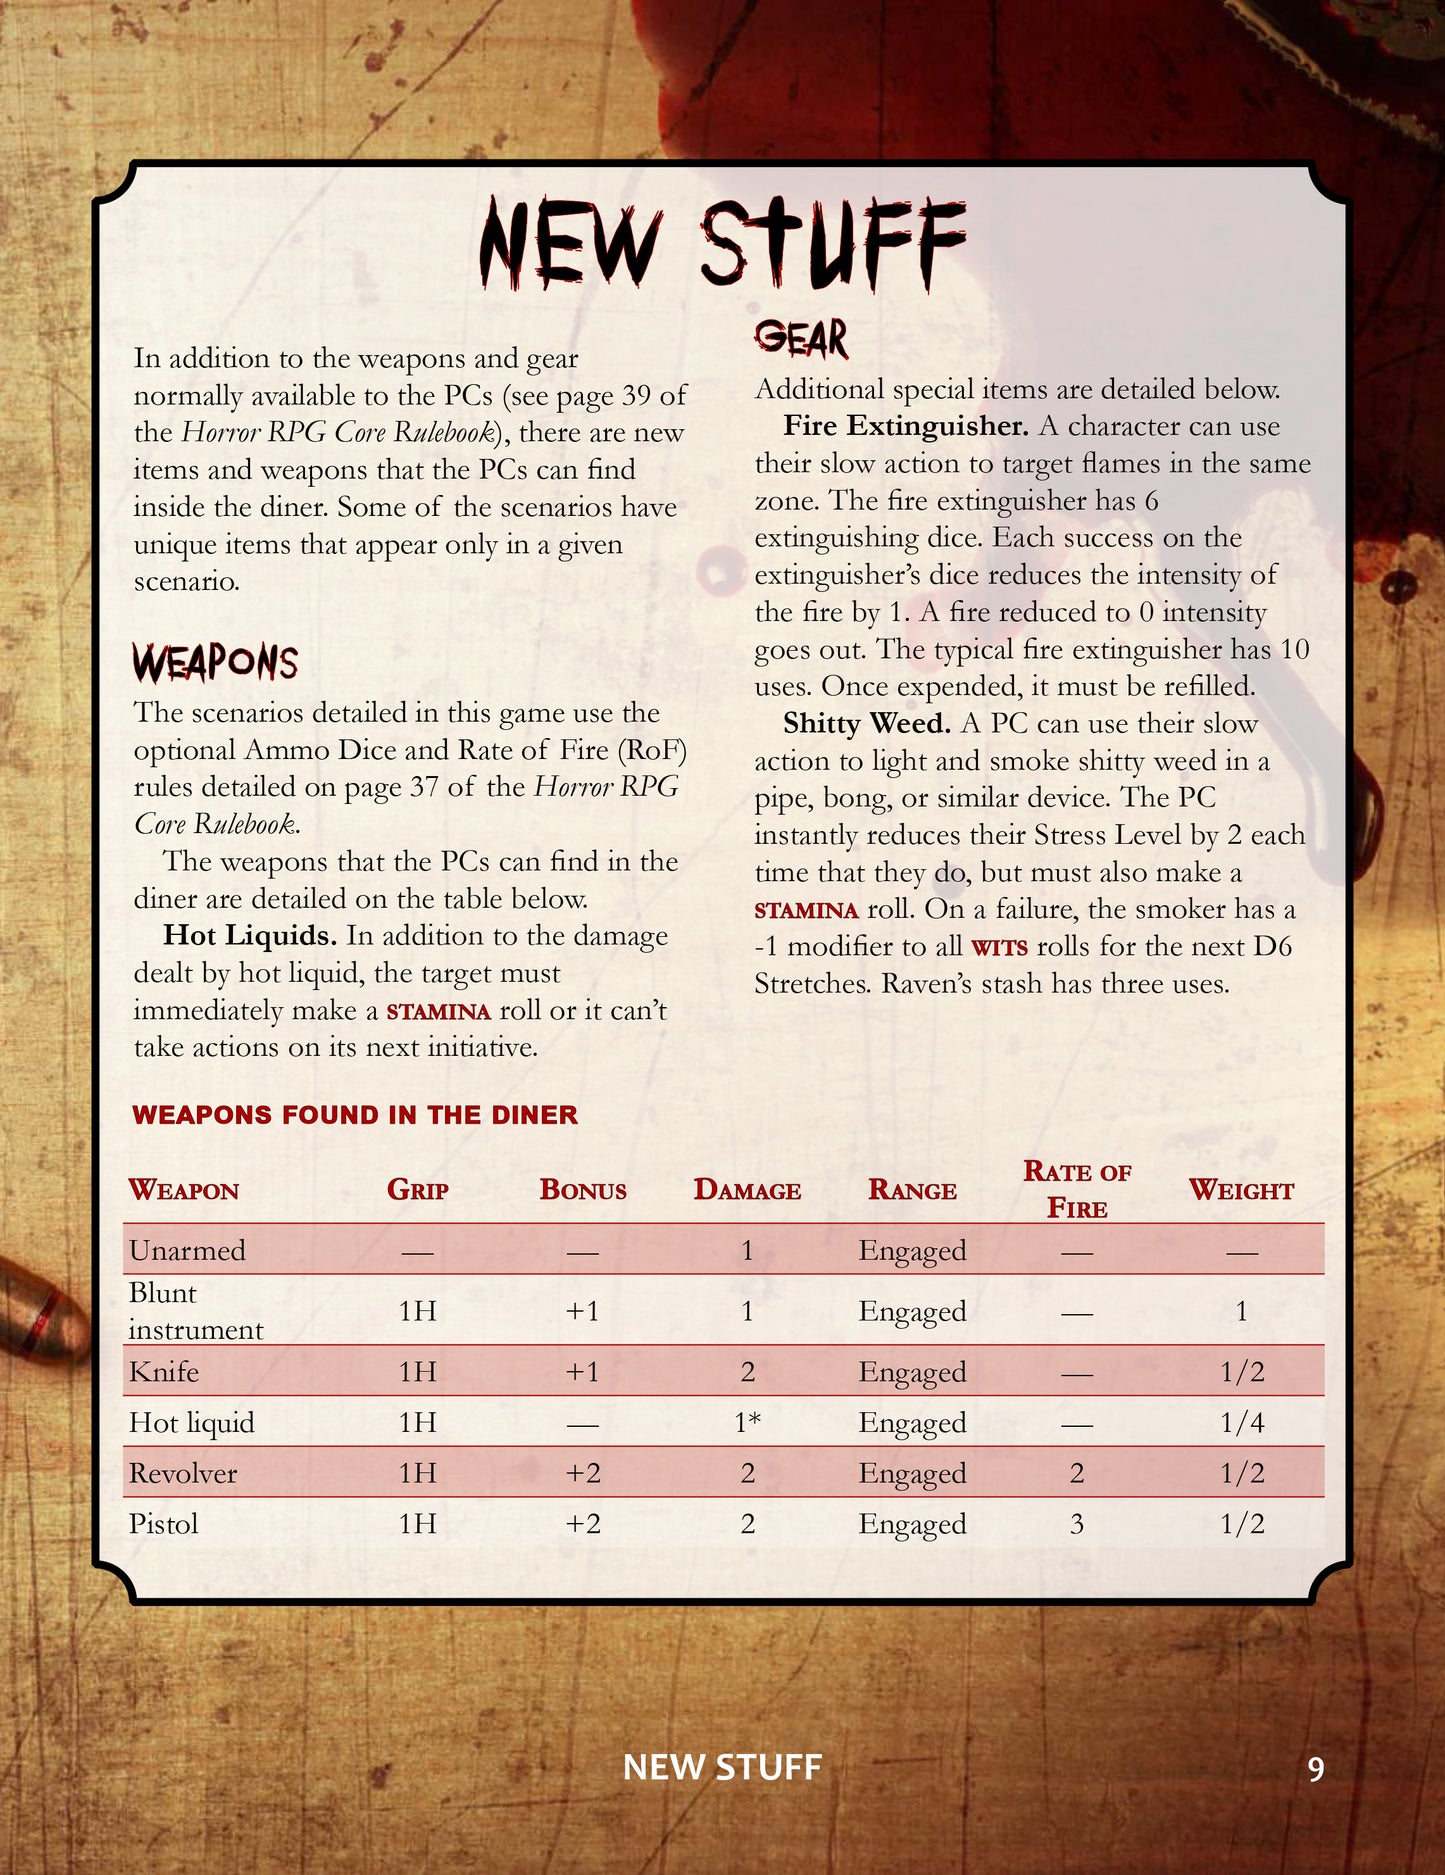 The Diner — A Scenario Book for the Horror RPG